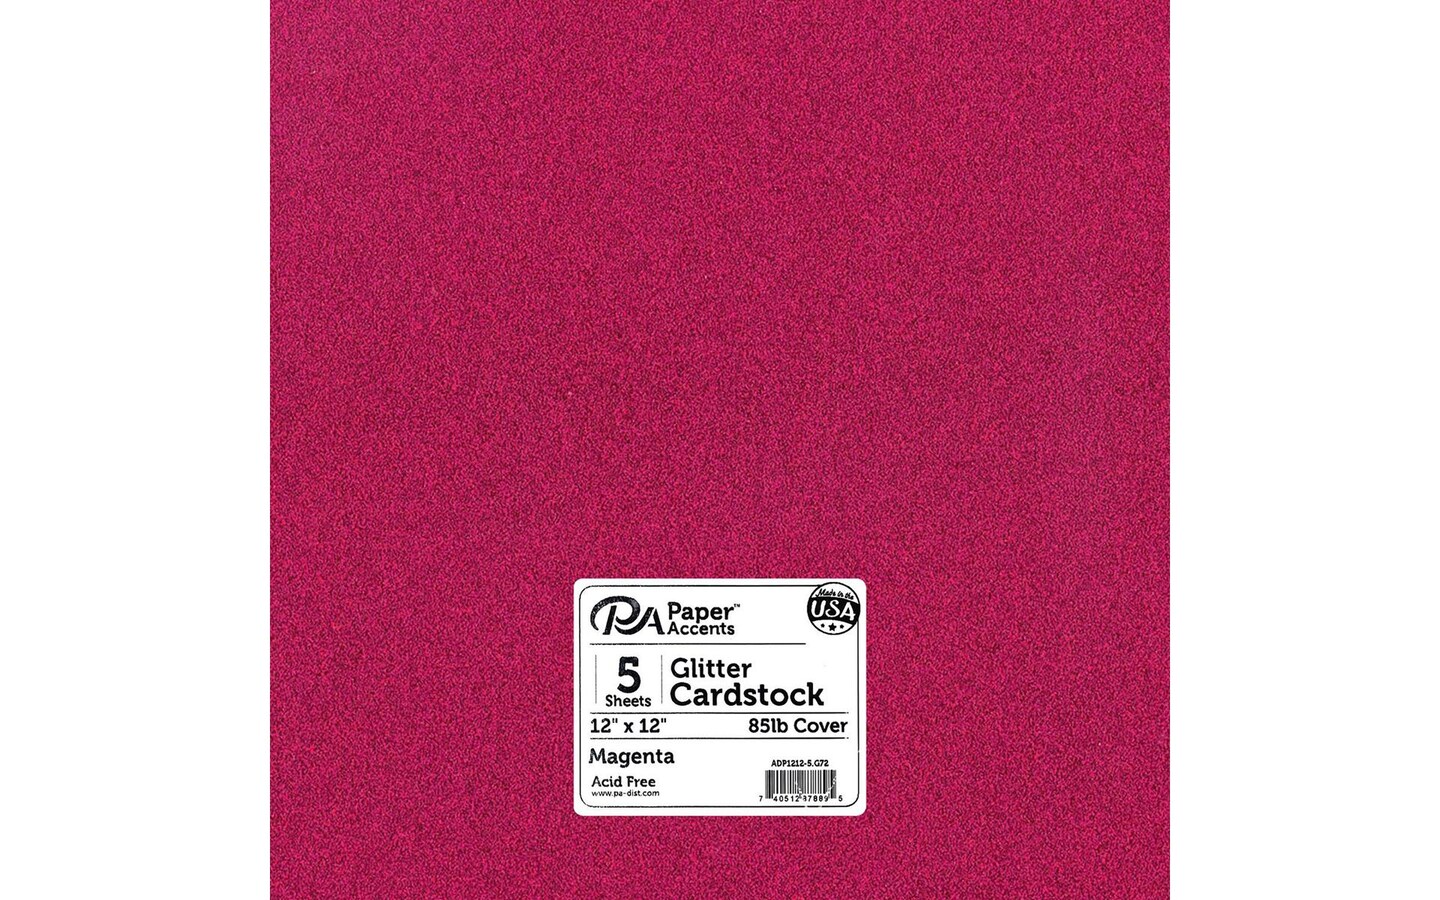 PA Paper Accents Glitter Cardstock 12? x 12? Magenta, 85lb colored cardstock paper for card making, scrapbooking, printing, quilling and crafts, 5 piece pack